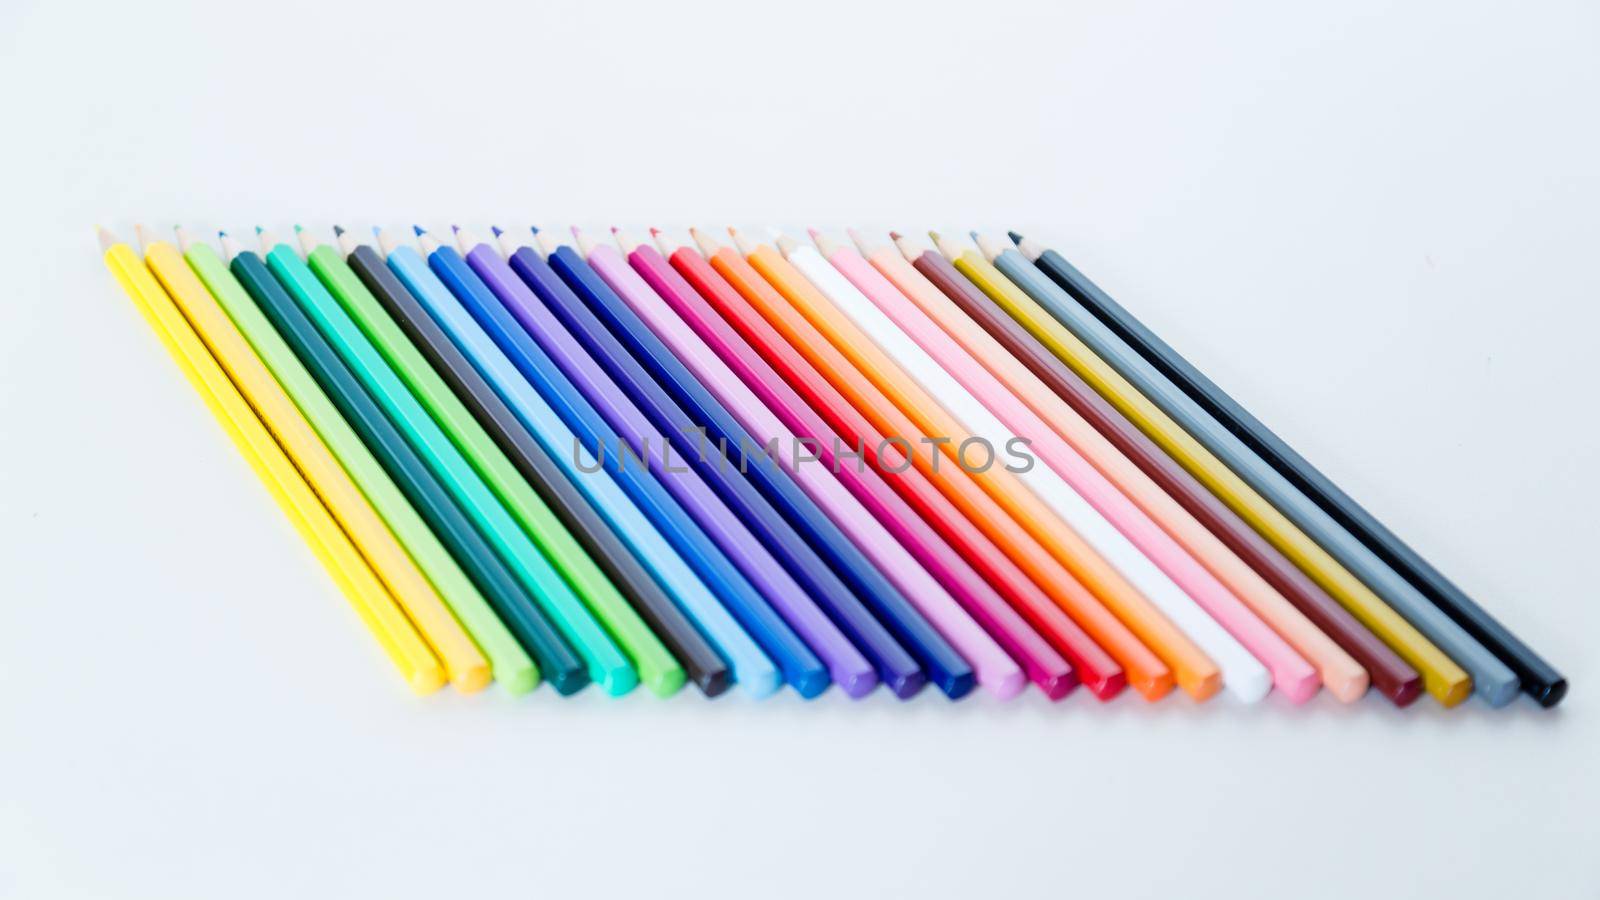 Colored pencil crayons in a row by imagesbykenny